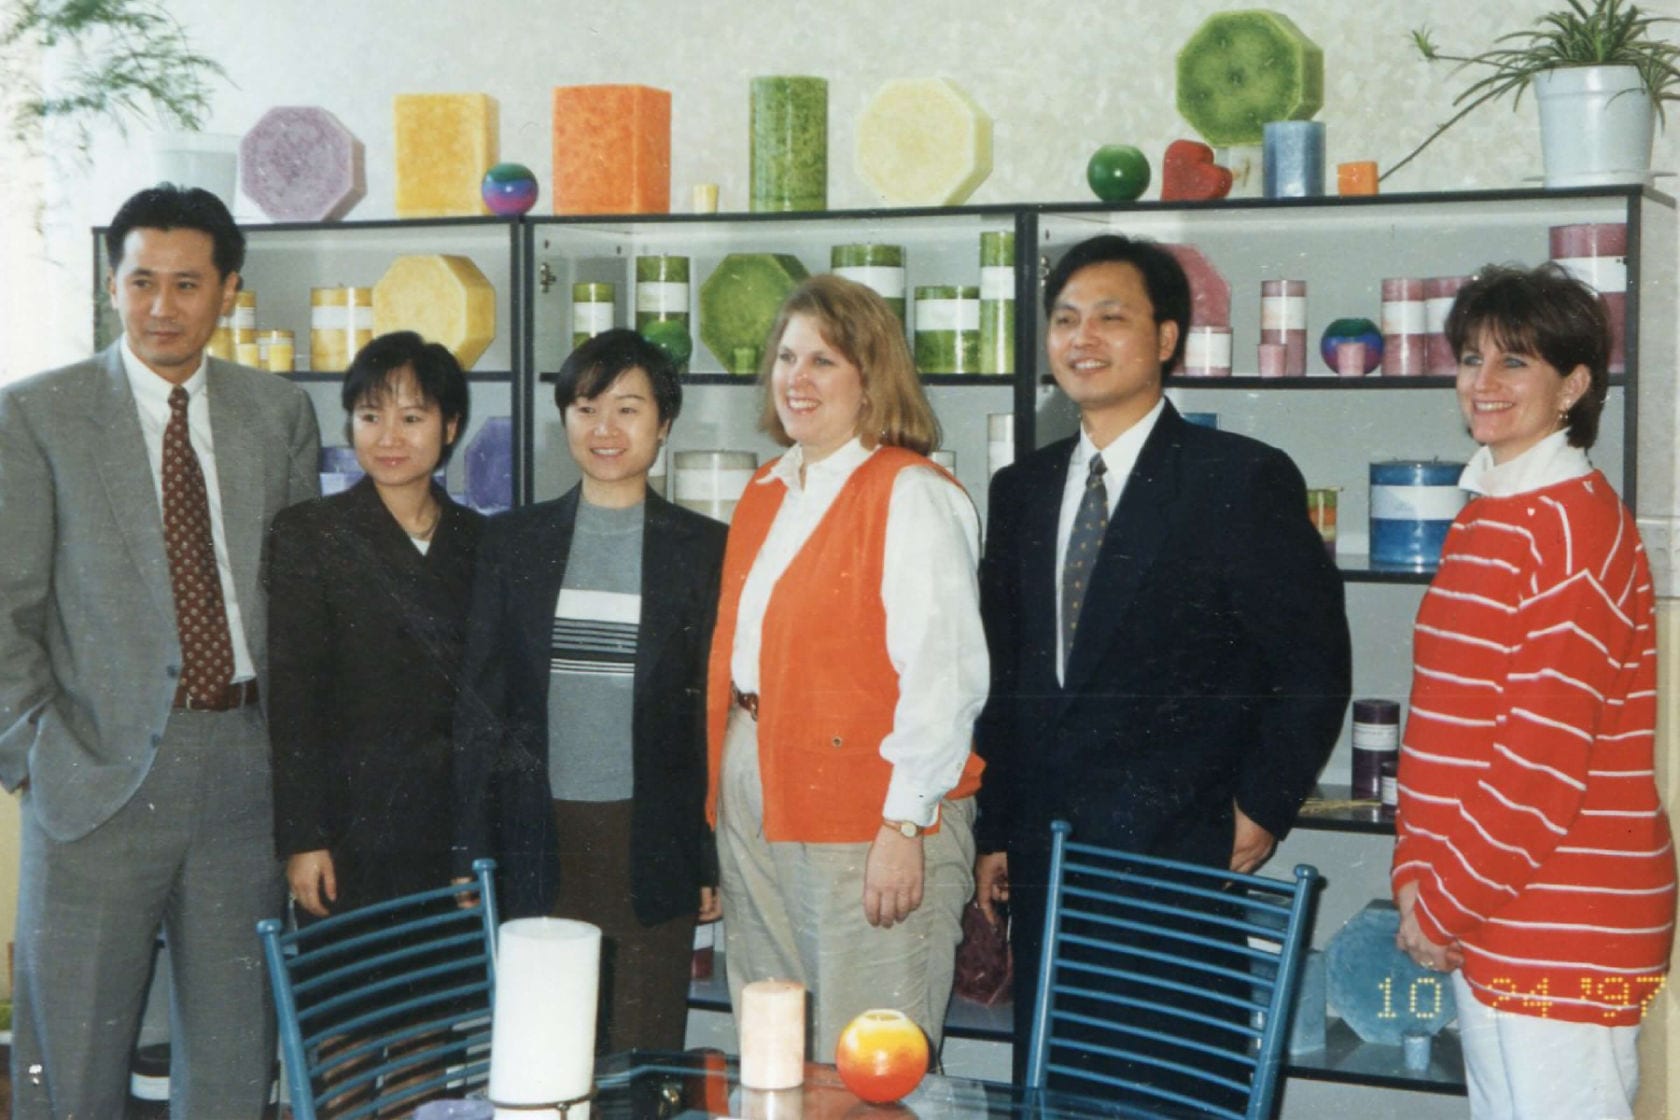 First team of Target buyers visit the China Factory (1997); from left to right: David Wang, Mei, Li, Jennifer Schock, Tom (Li's husband), and a senior Target buyer.